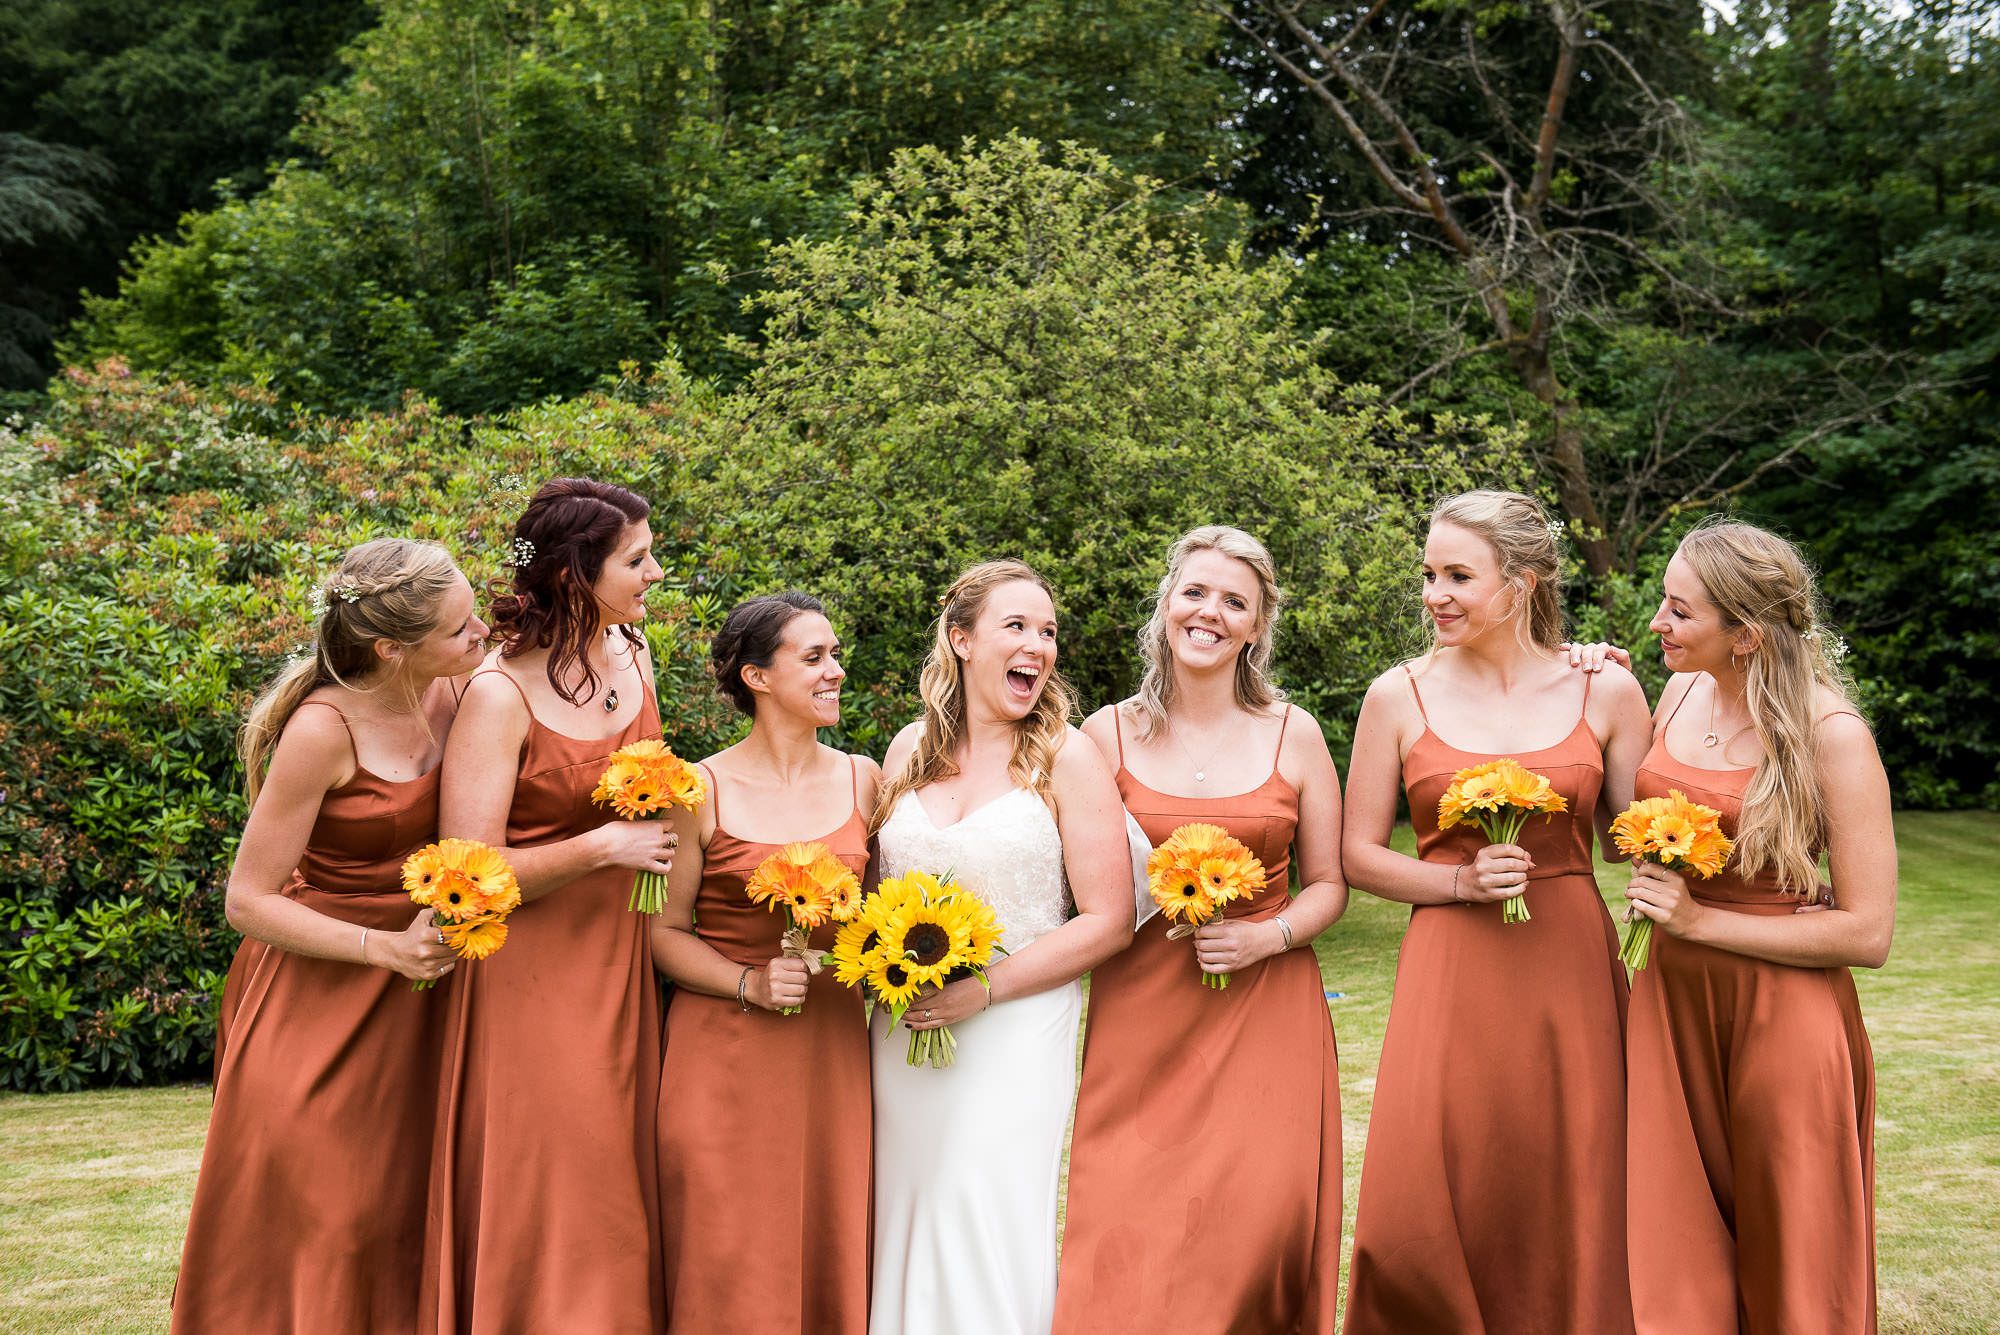 creative wedding photography surrey, bride laughs with her bridesmaids dressed in matching burnt orange strappy dresses